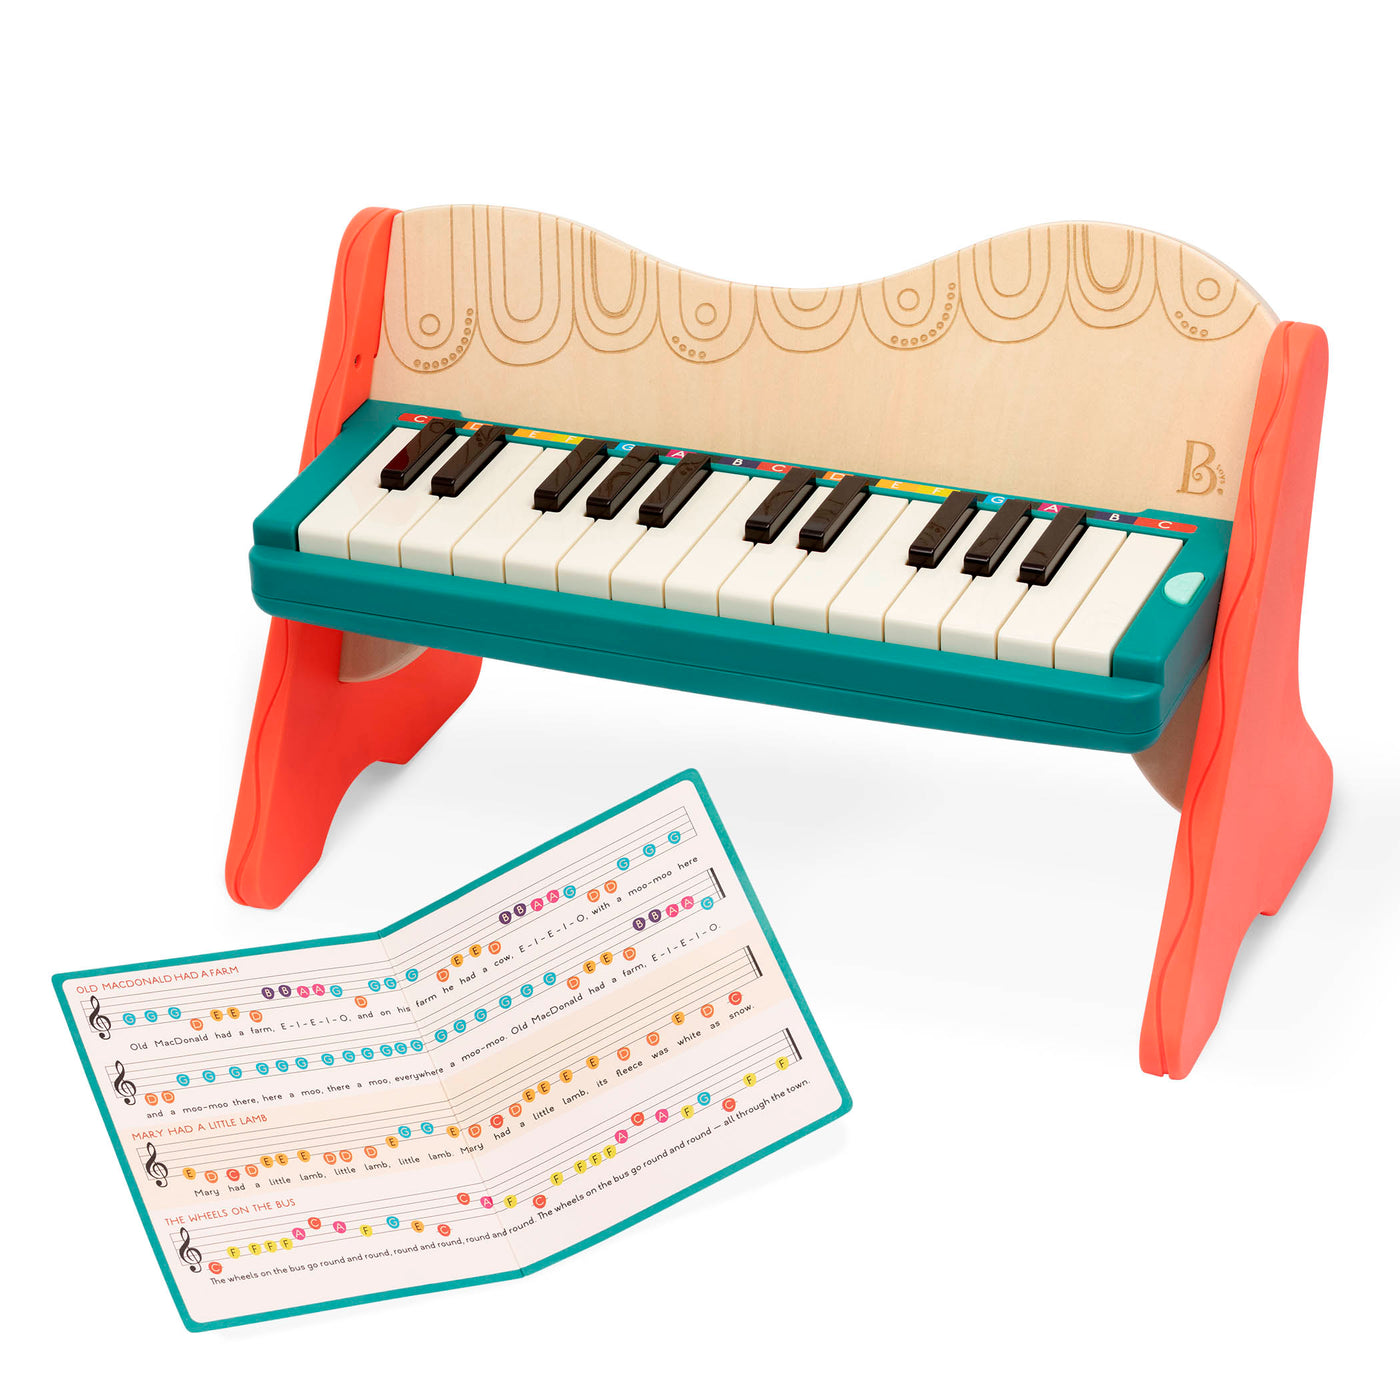 Wooden toy piano with songbook.